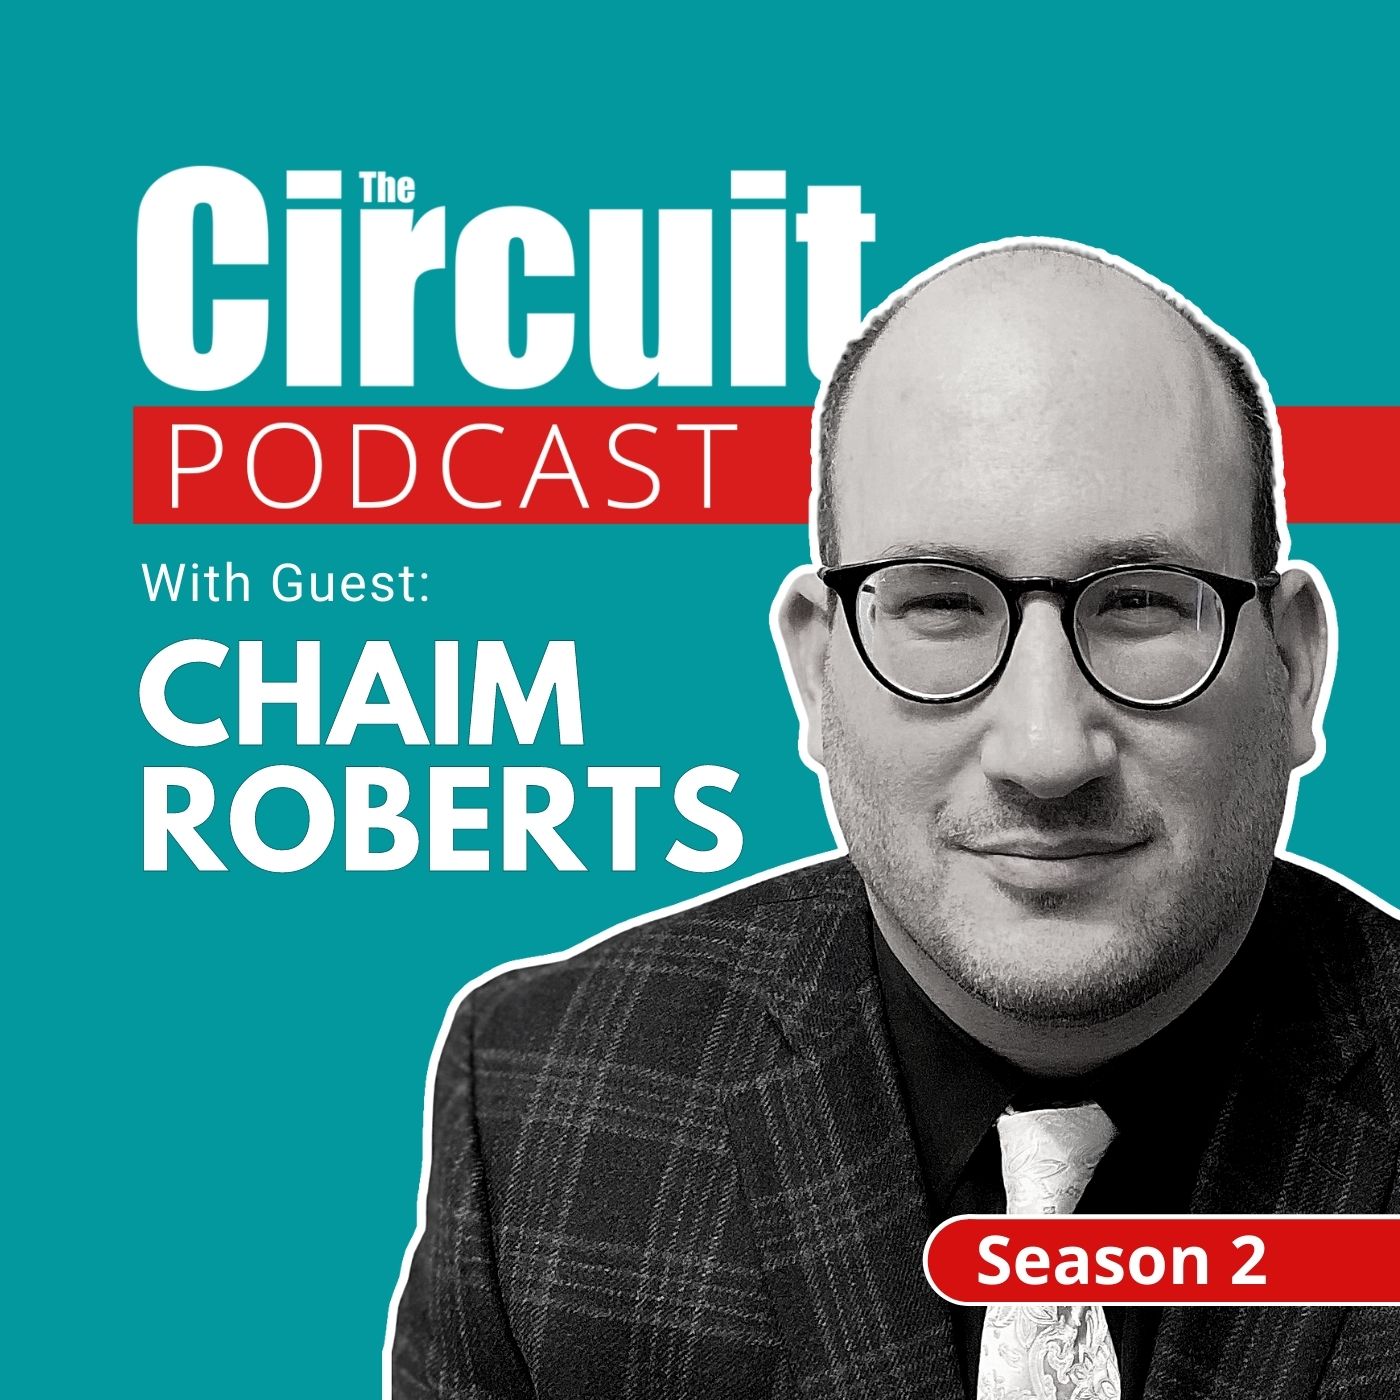 Artwork for podcast The Circuit Magazine Podcast